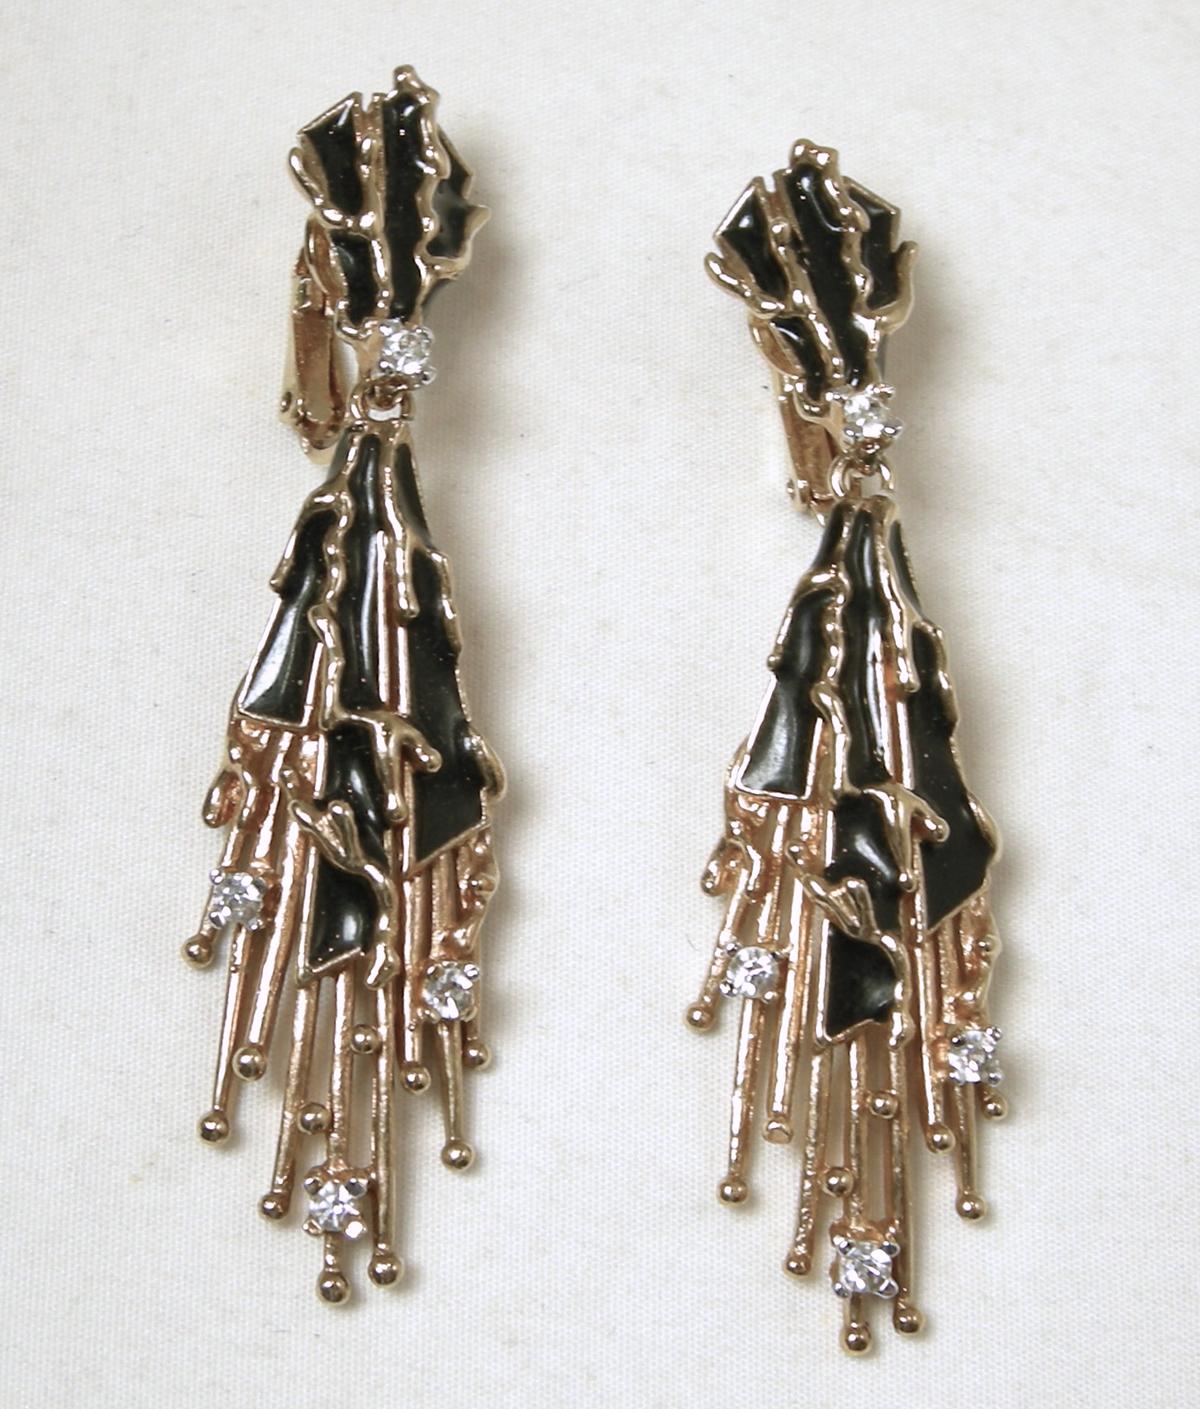 This vintage signed Panetta earrings has black enameling with clear crystal accents in a gold tone setting.  In excellent condition, these clip earrings measure 2-1/2” x 5/8” and are signed “Panetta”.